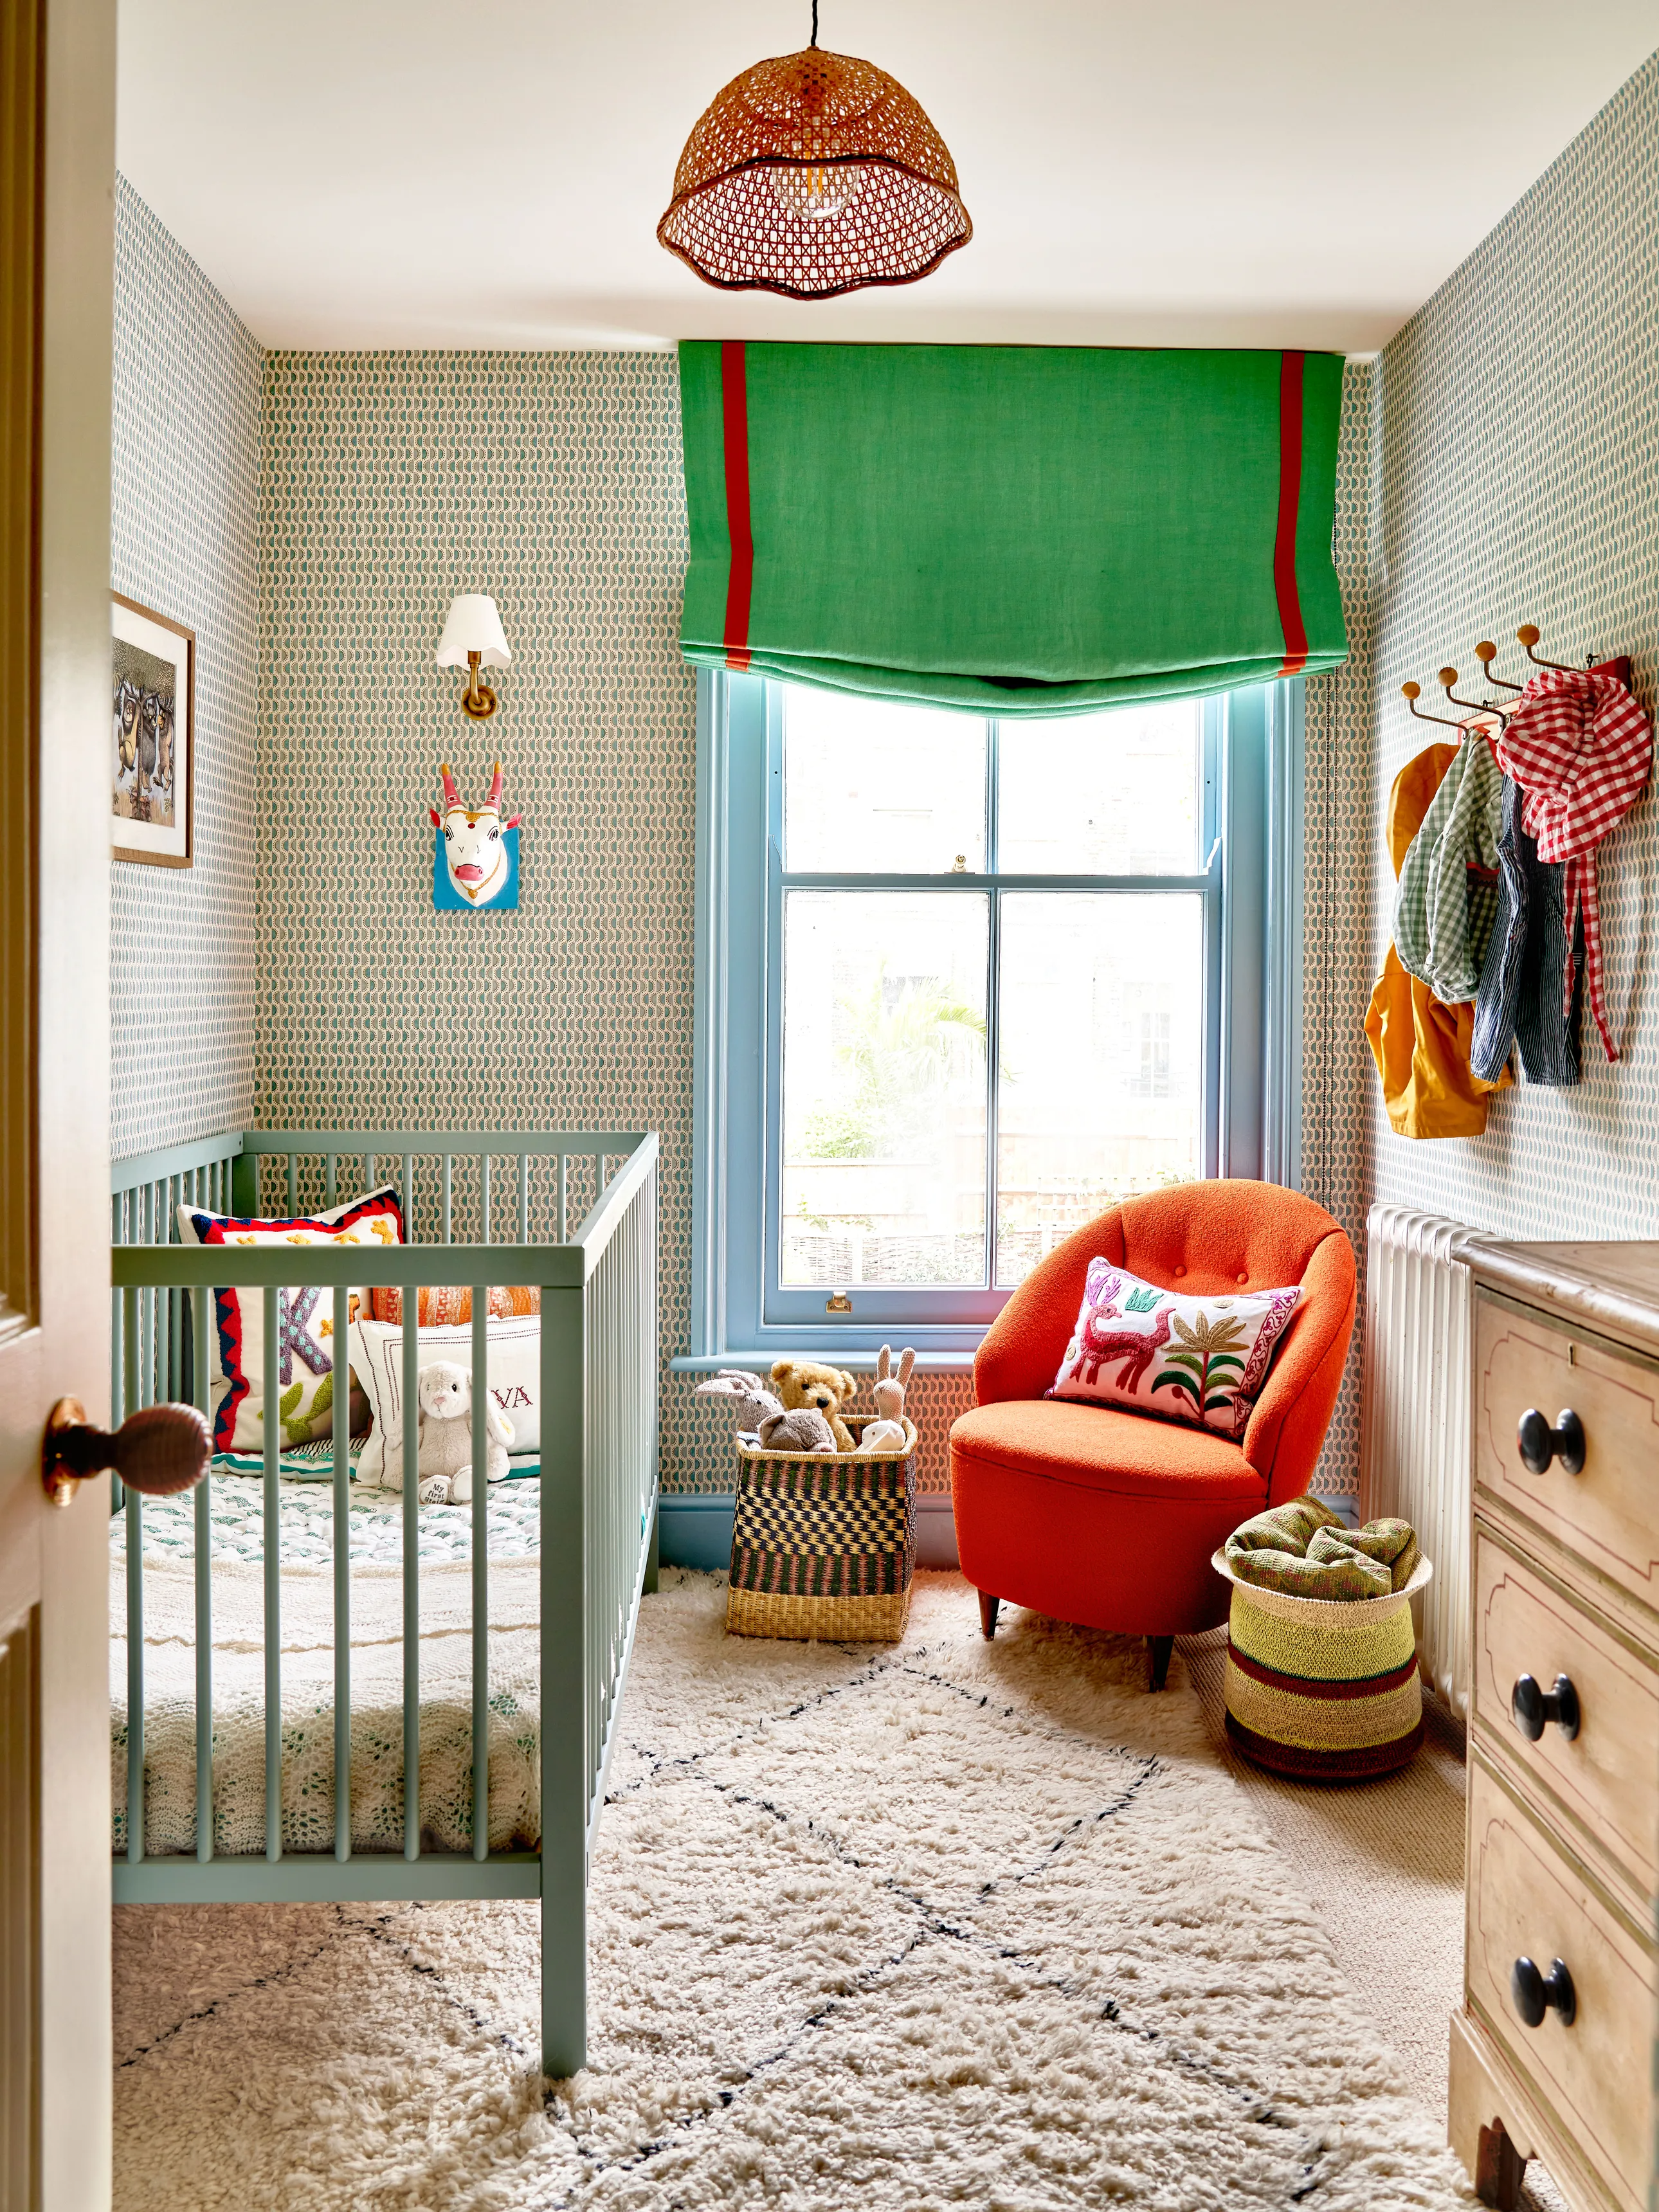 Kids room-a haven where your child can be
comfortable